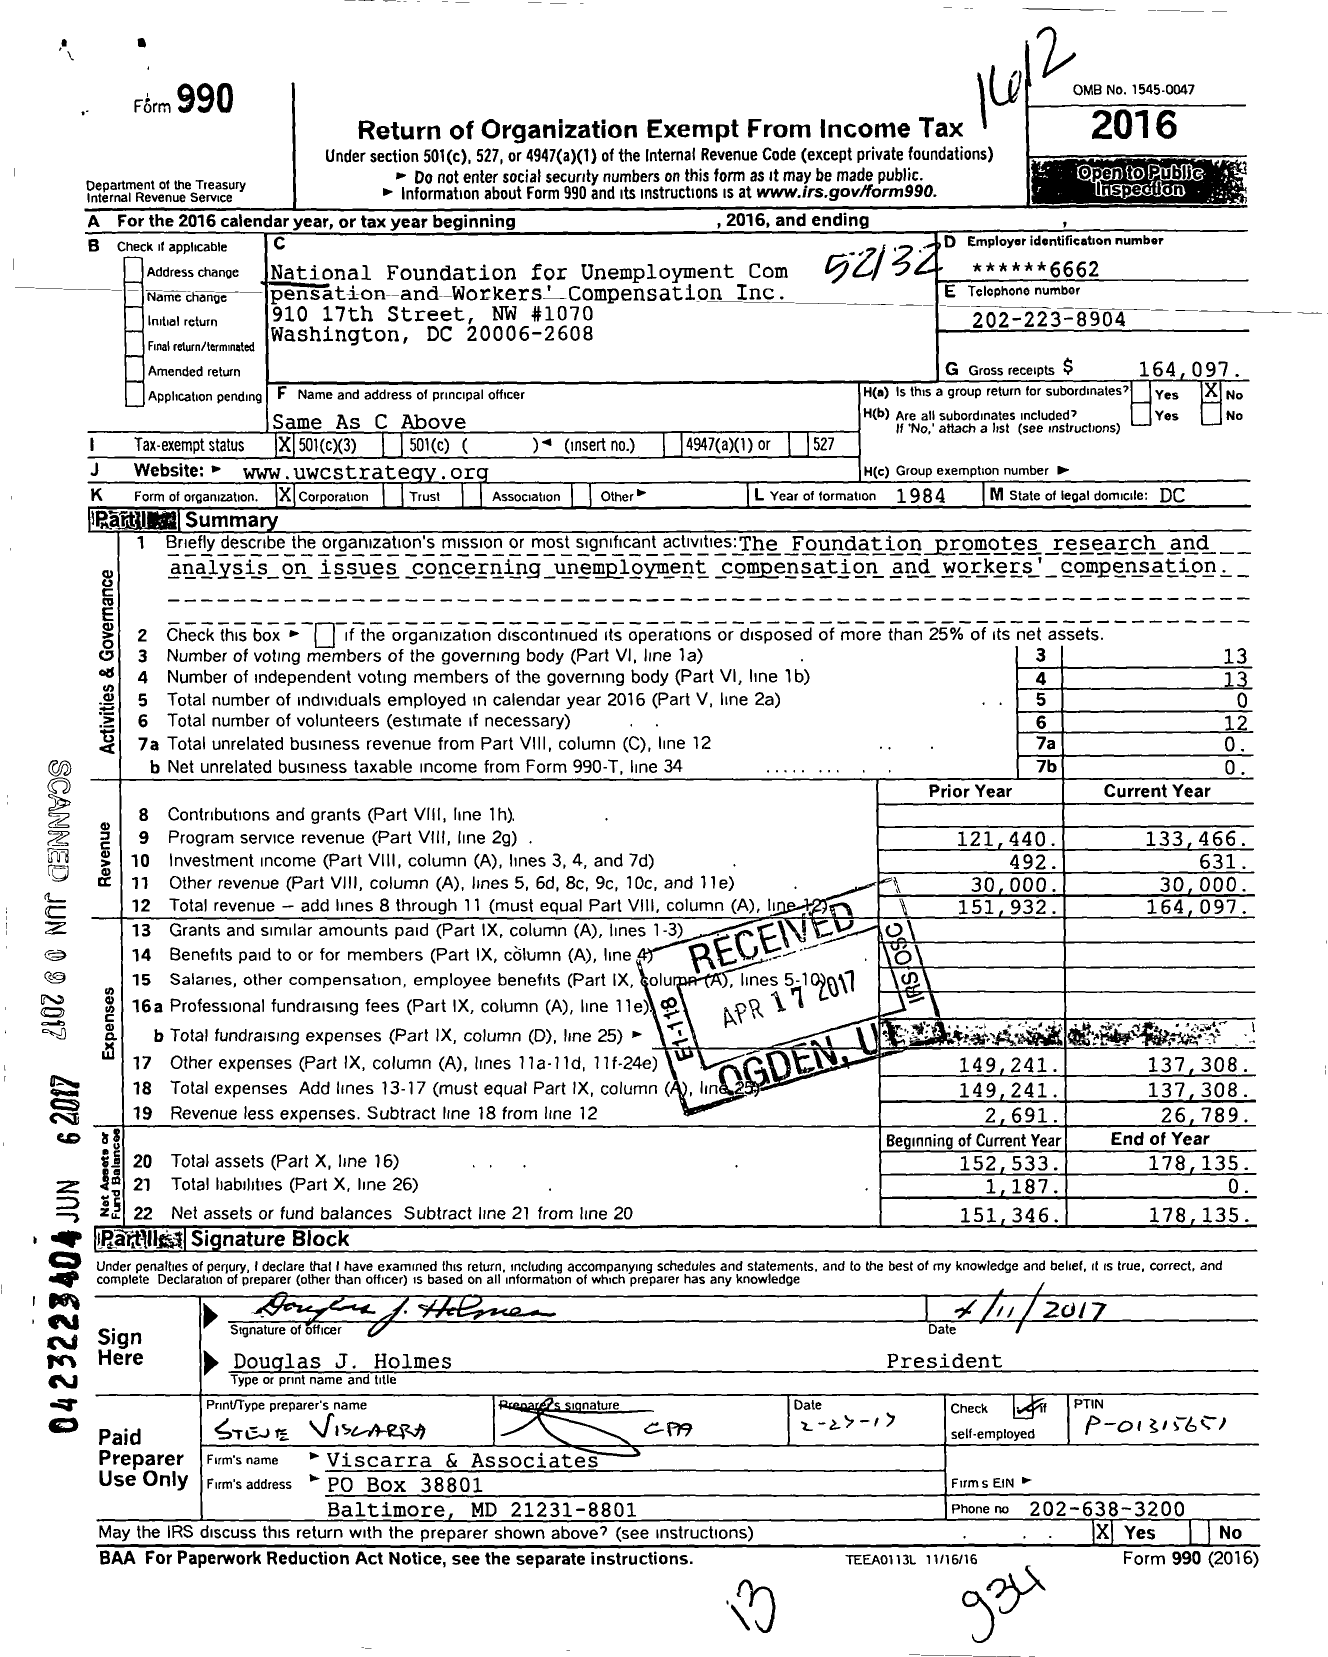 Image of first page of 2016 Form 990 for National Foundation for Unemployment Compensation pensation and Workers Compensation